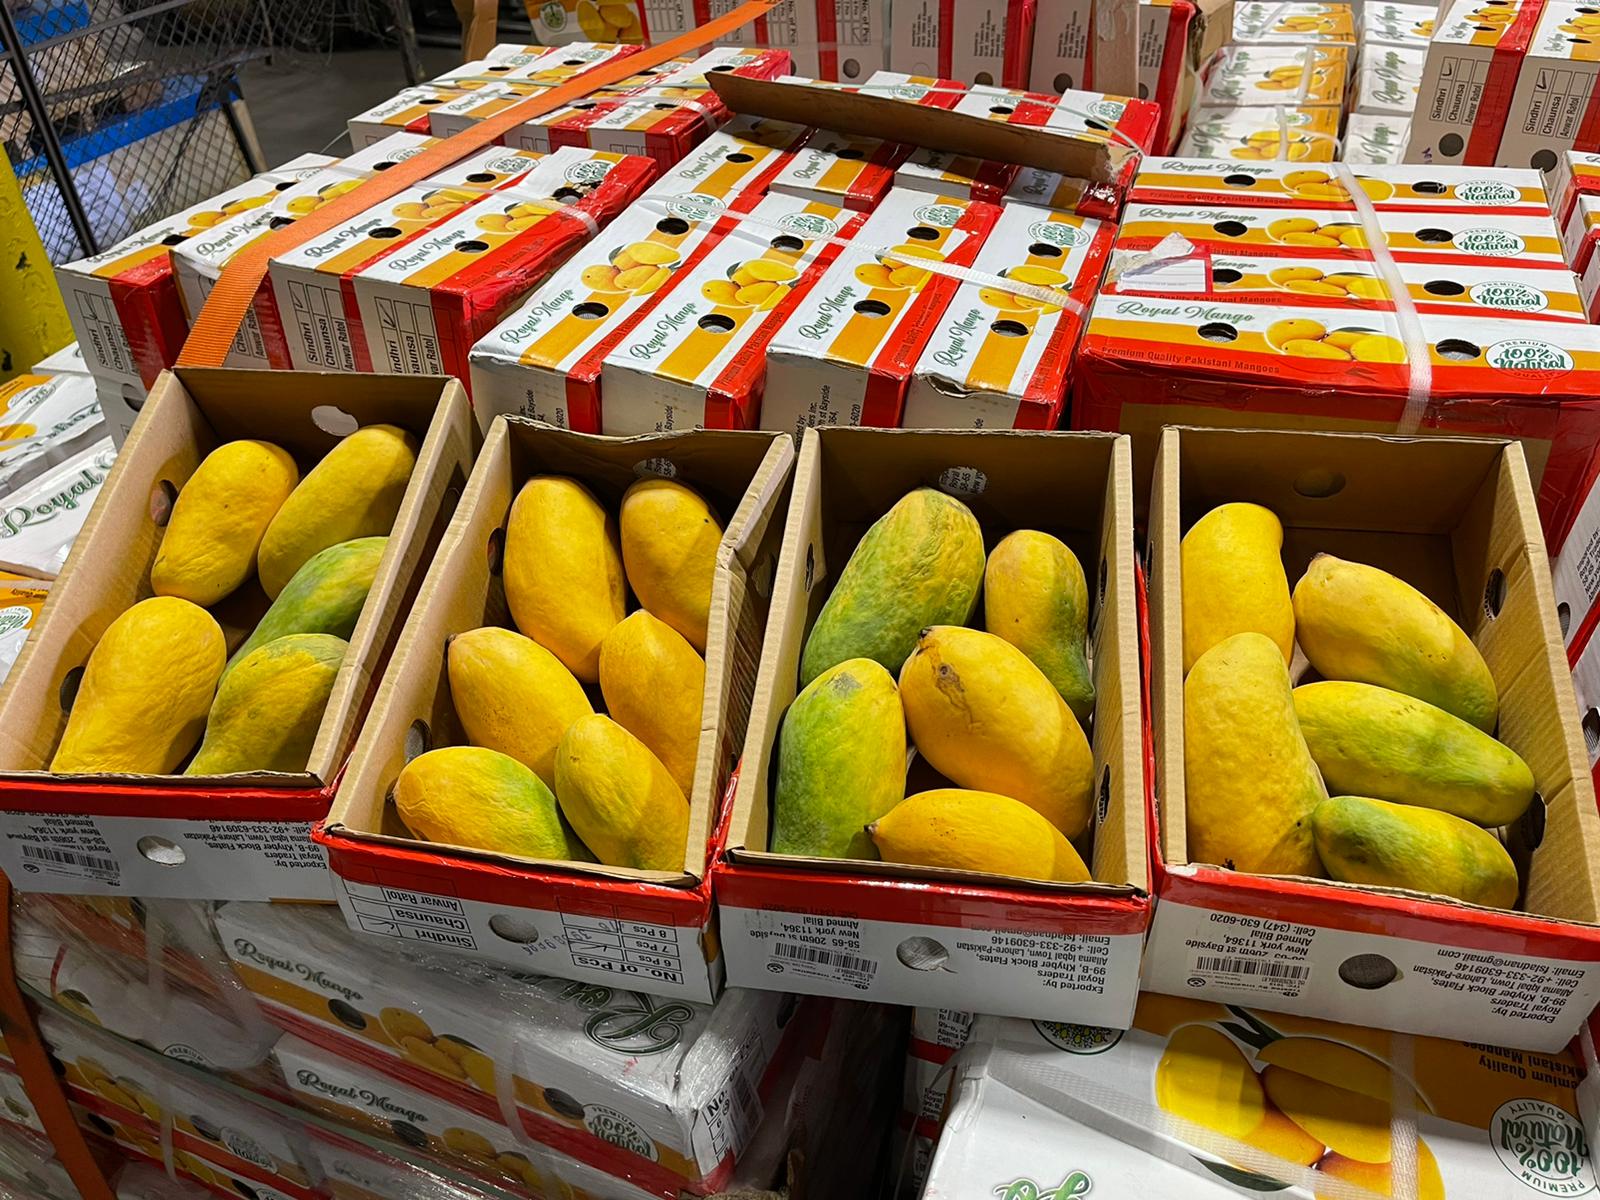 Pakistani mangoes are picked up at airport cargo bays by mango middlemen like Nauman Chaudary.